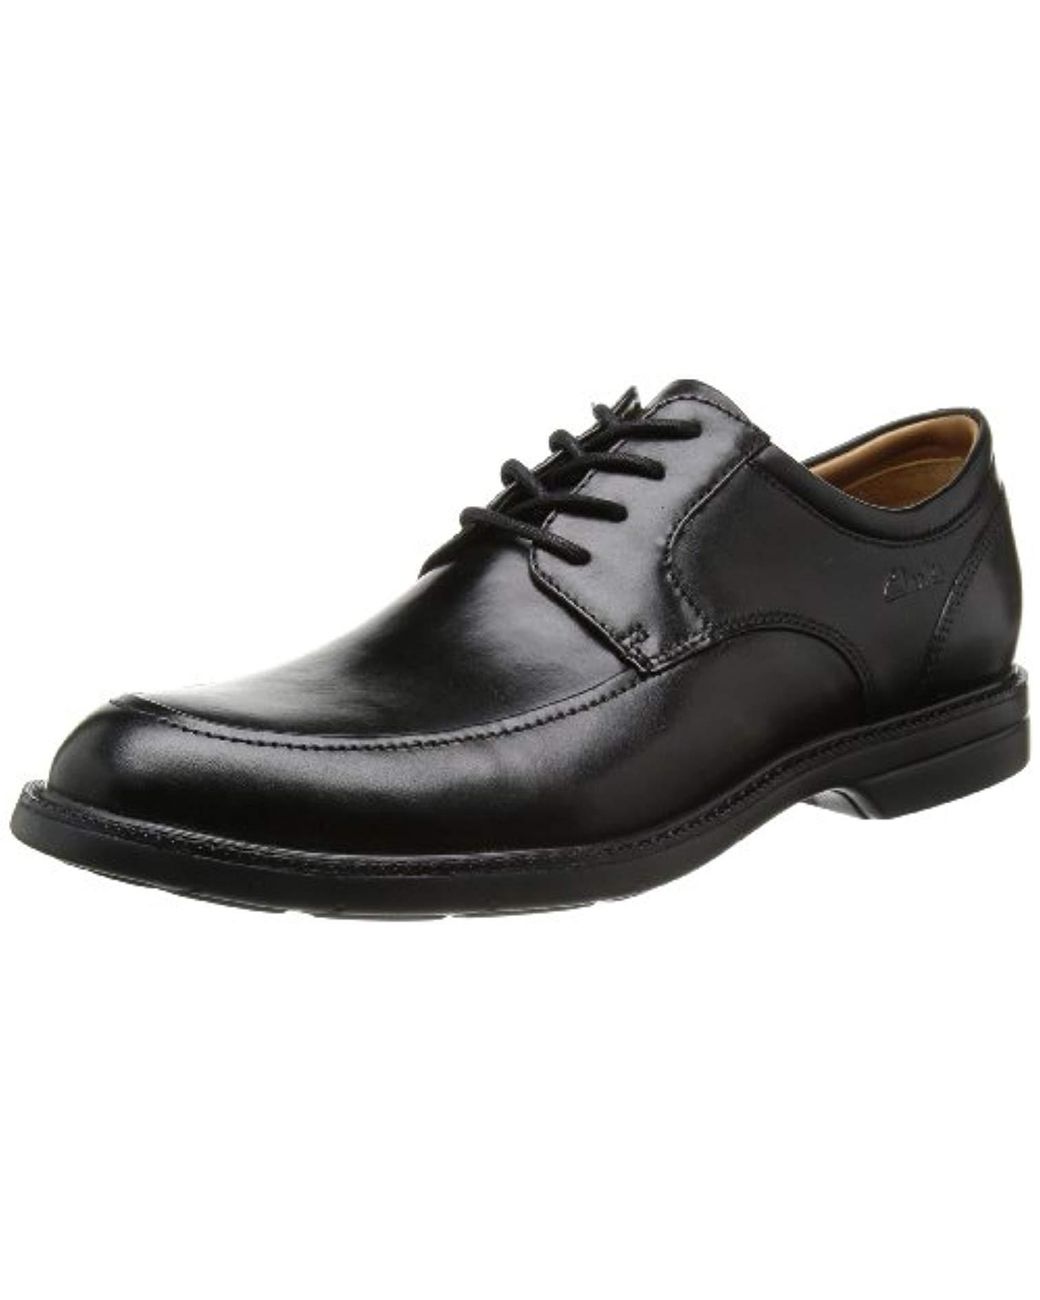 MENS CLARKS LEATHER SMART FORMAL CLASSIC DRESS LACE UP SHOES AMIESON WALK SIZE